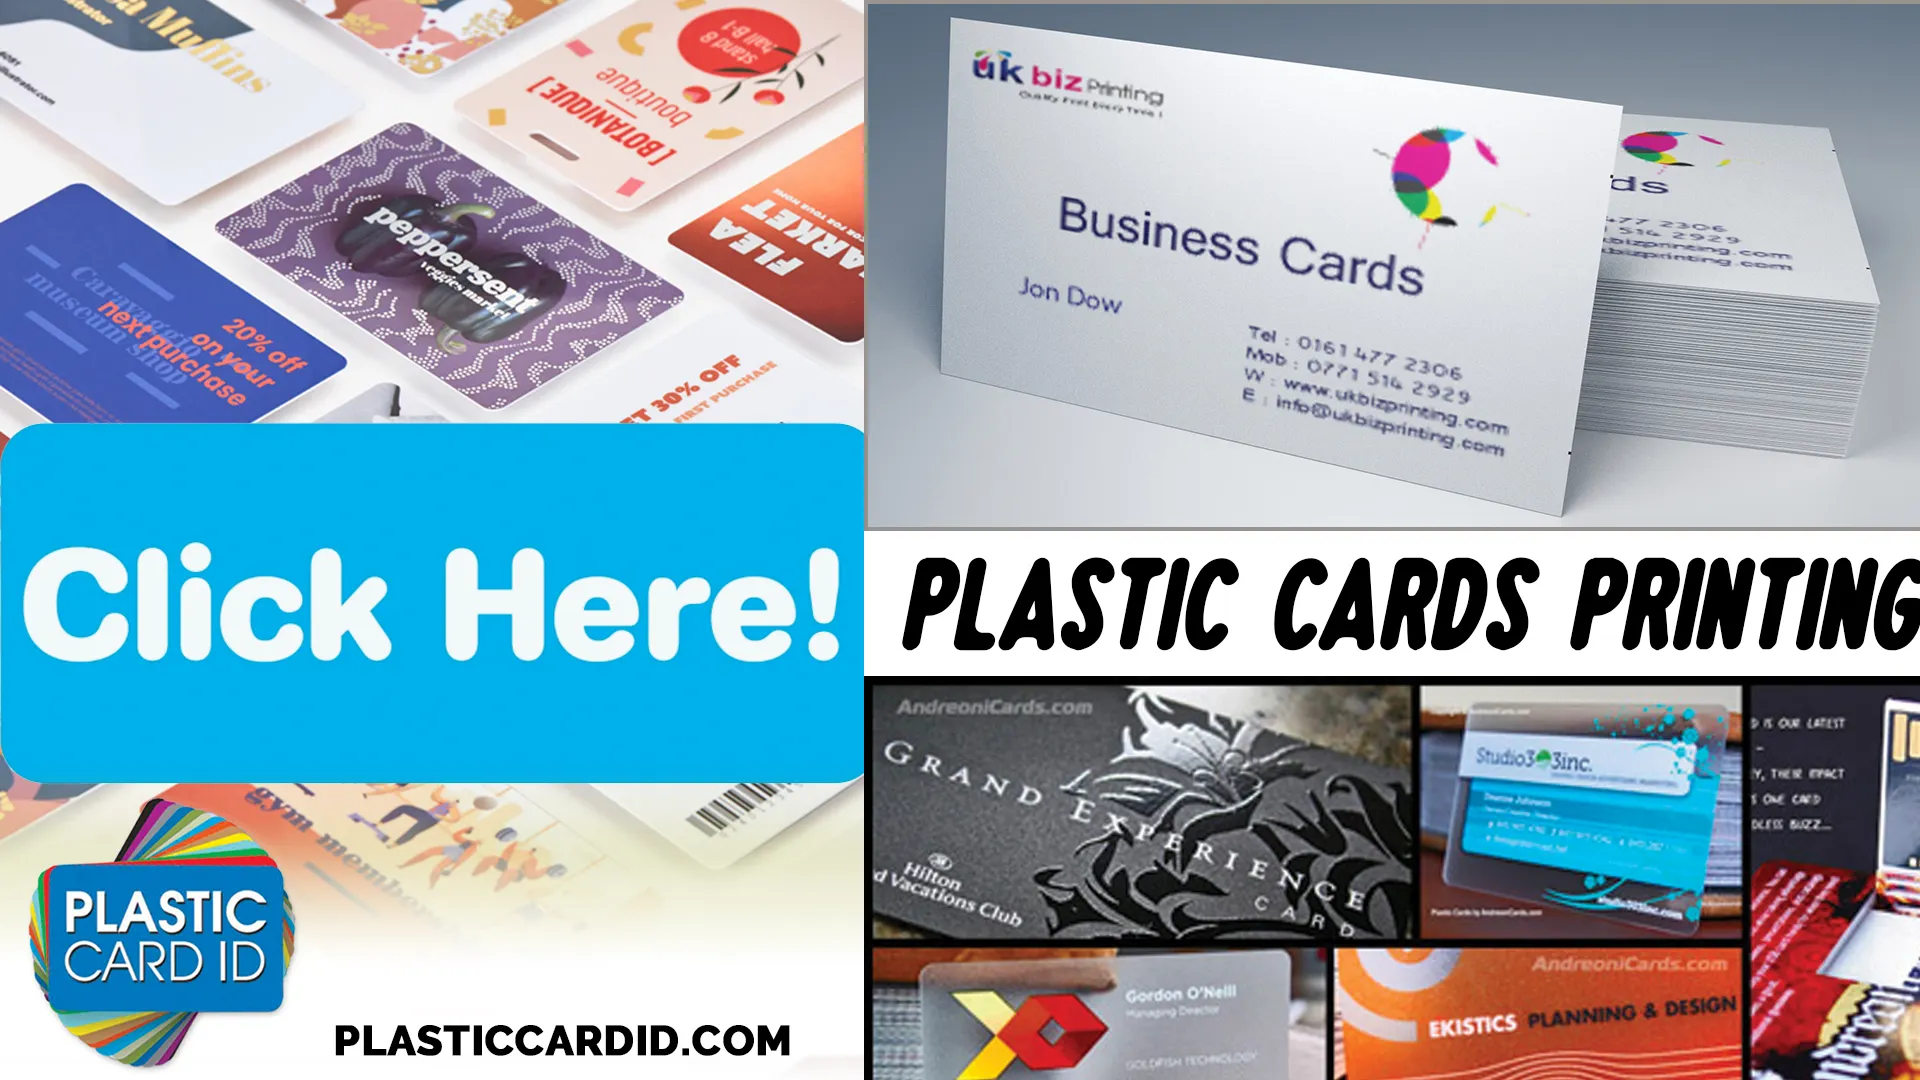 Discover the Unsurpassed Print Quality and Versatility with Plastic Card ID
